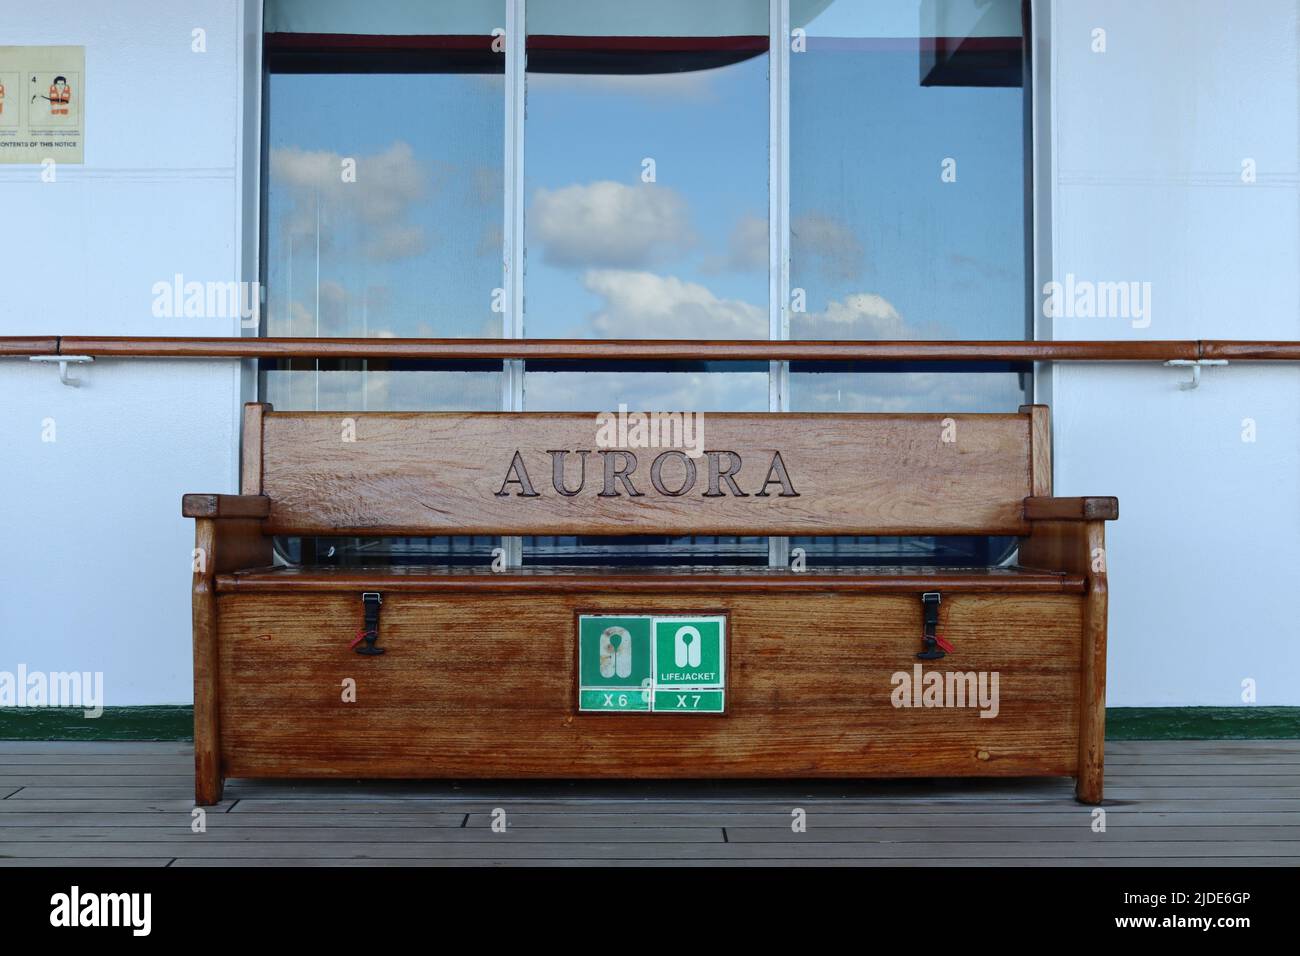 The P&O cruise ship Aurora’s promenade deck with a wooden bench seat with the ship’s name carved name on it. Stock Photo